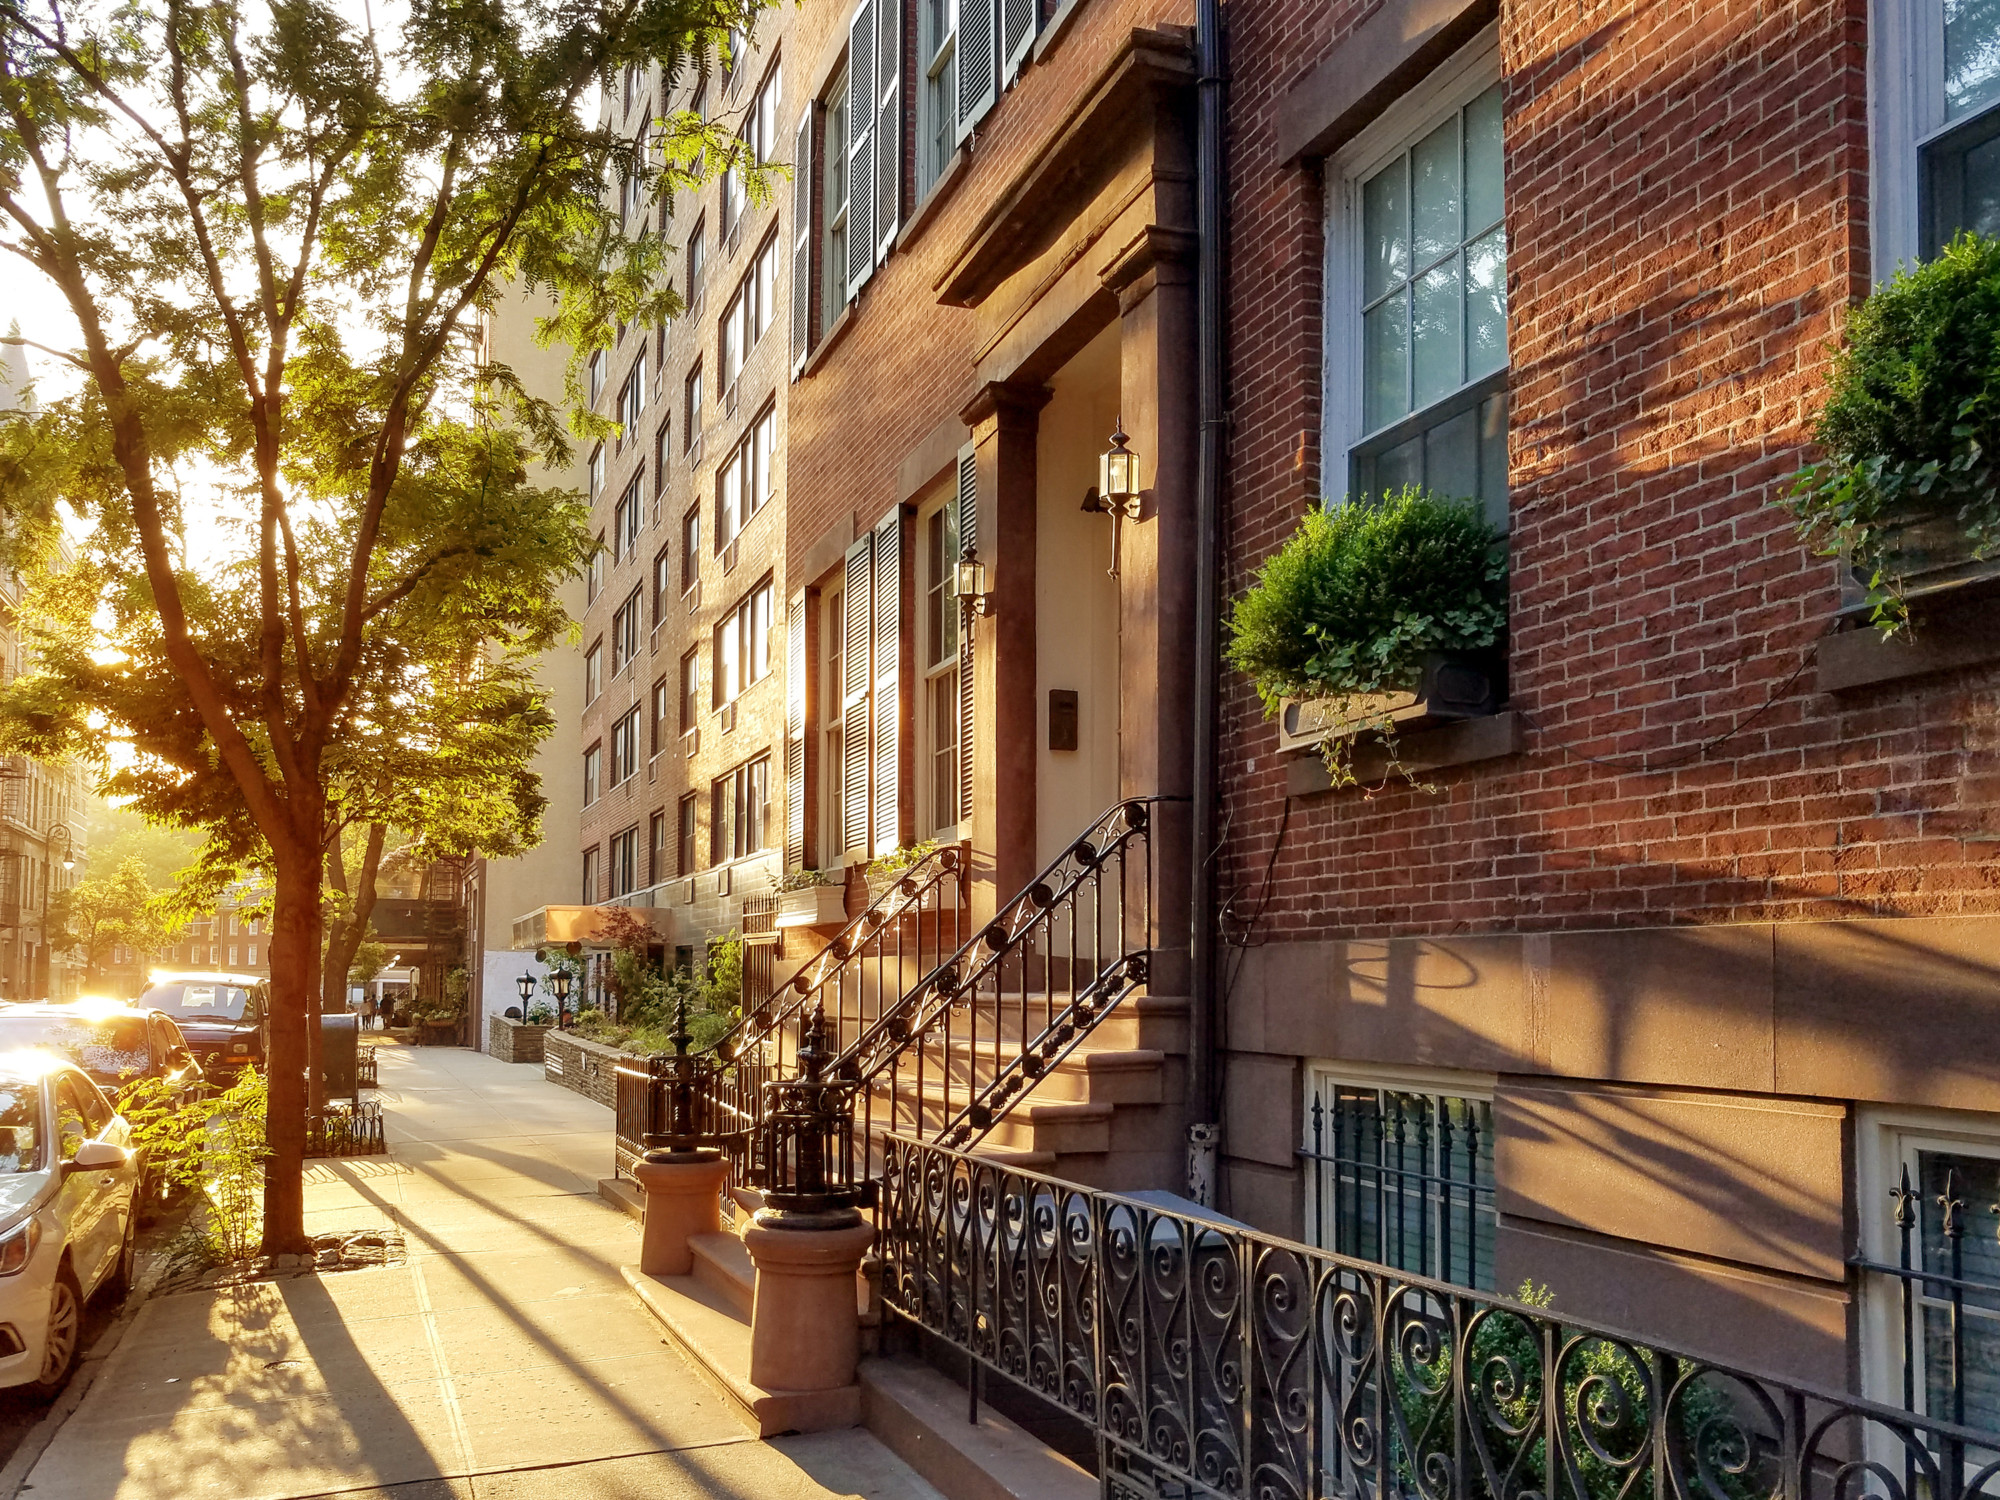 Tips for First-Time Real Estate Investors in NYC